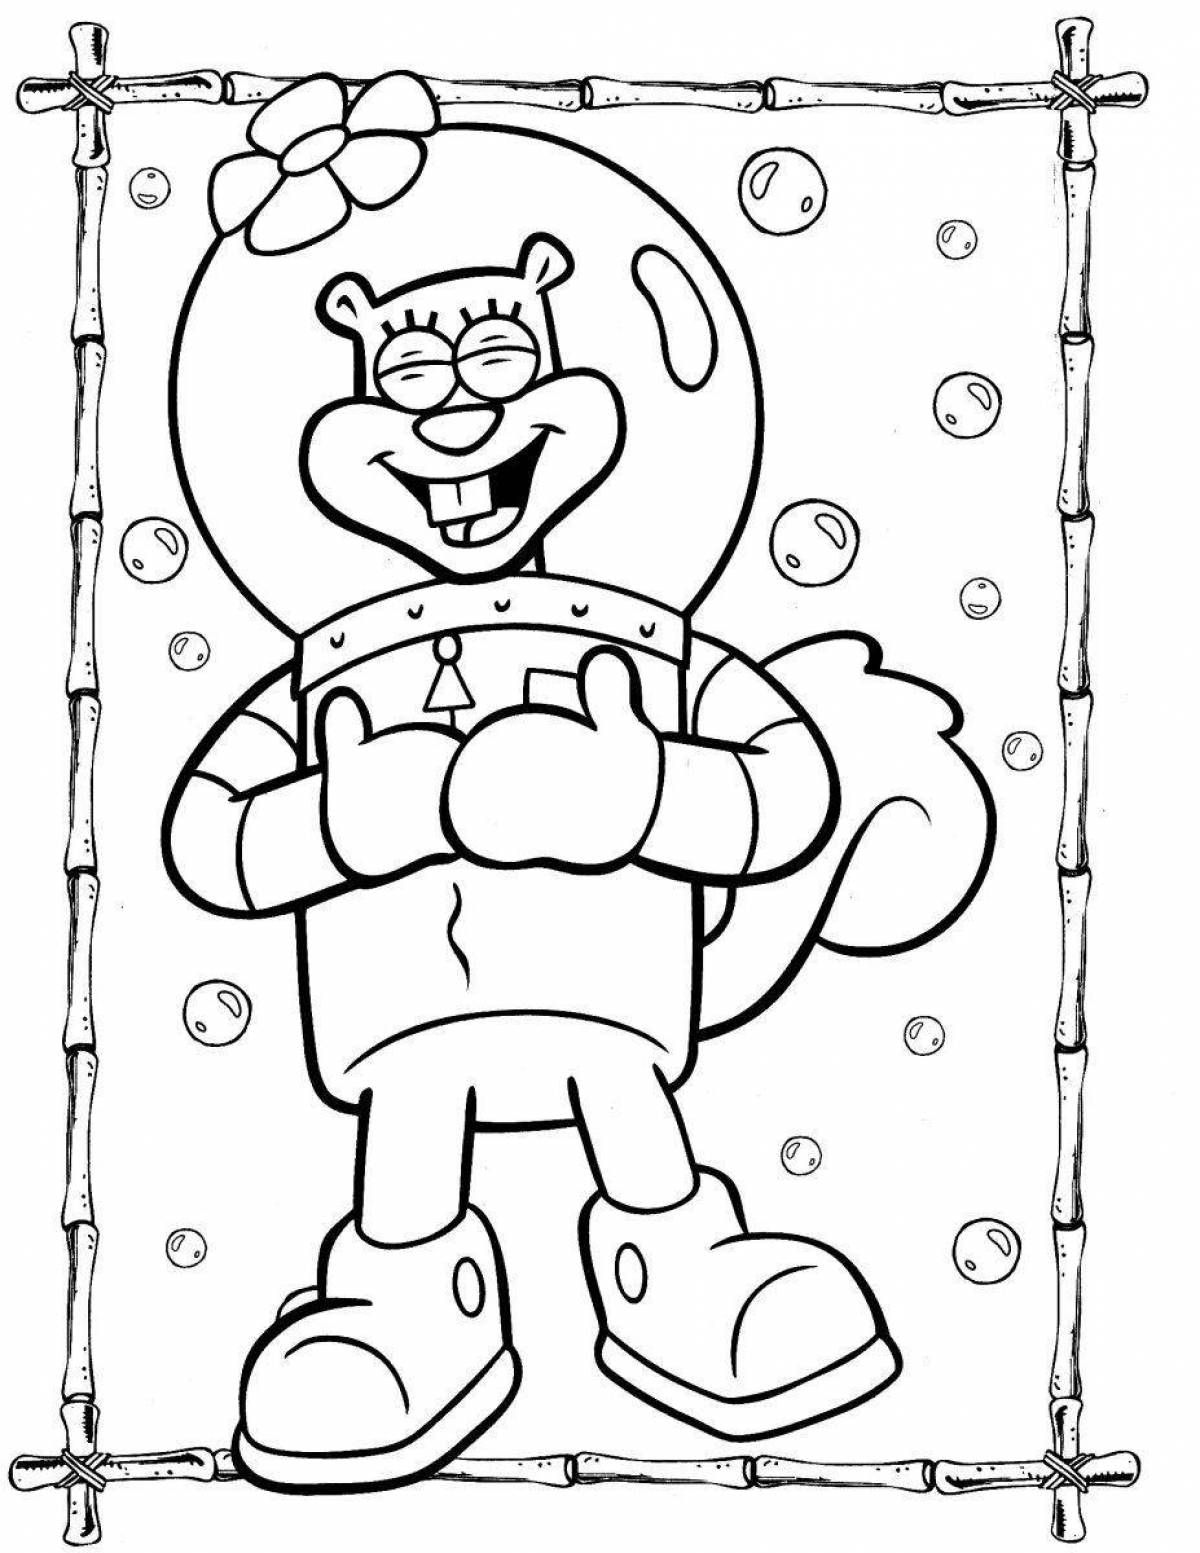 Sandy chicks animated coloring page